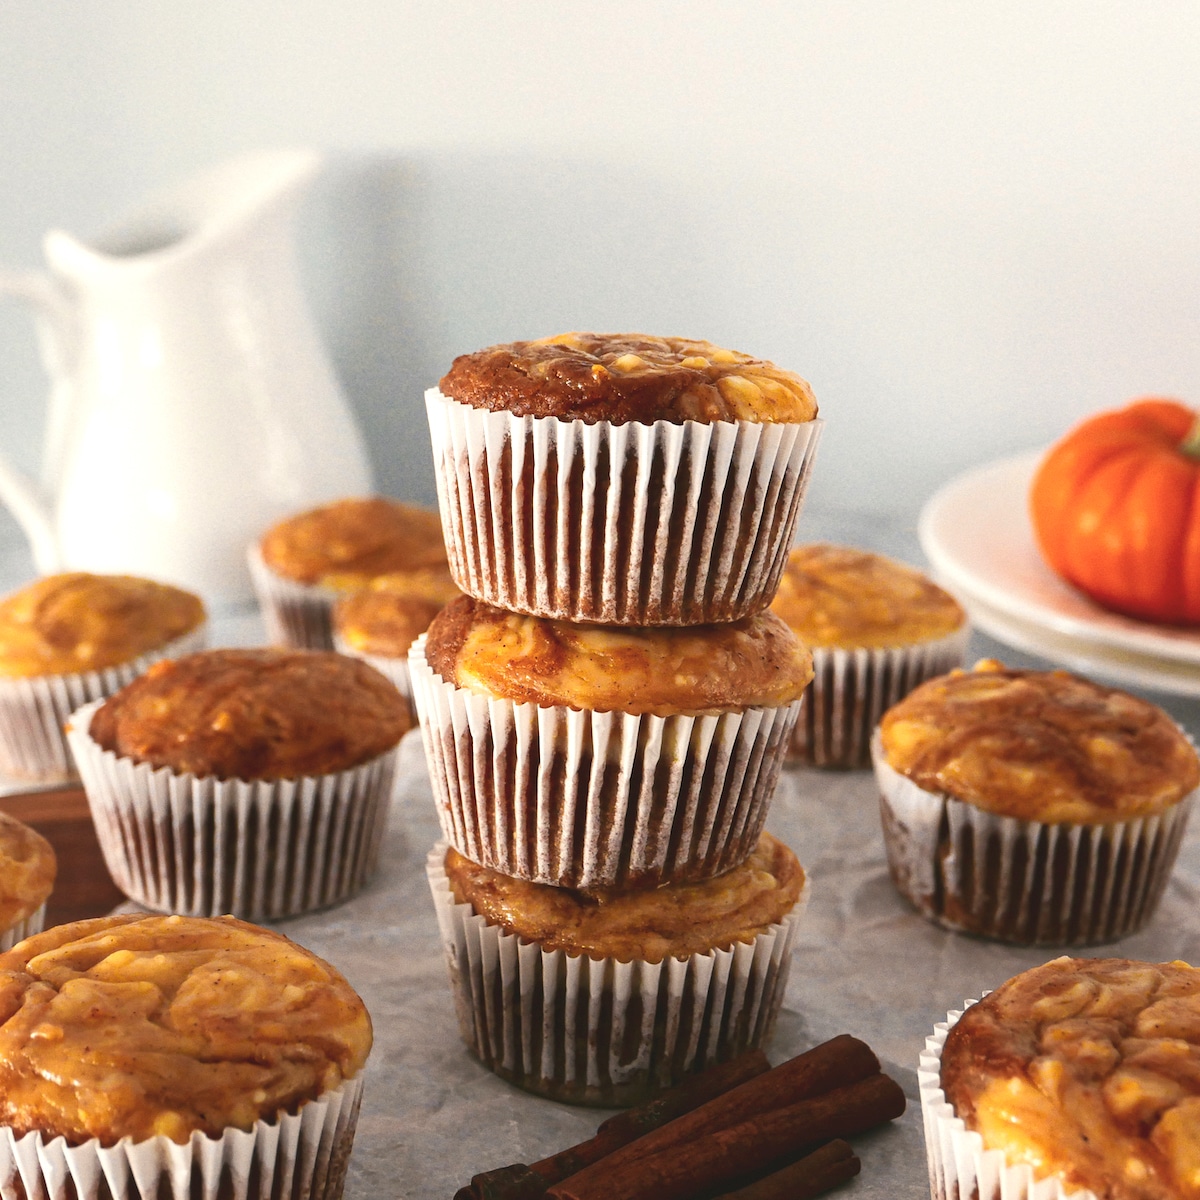 pumpkin cream cheese swirl muffins arranged on a table with milk pitcher in background.